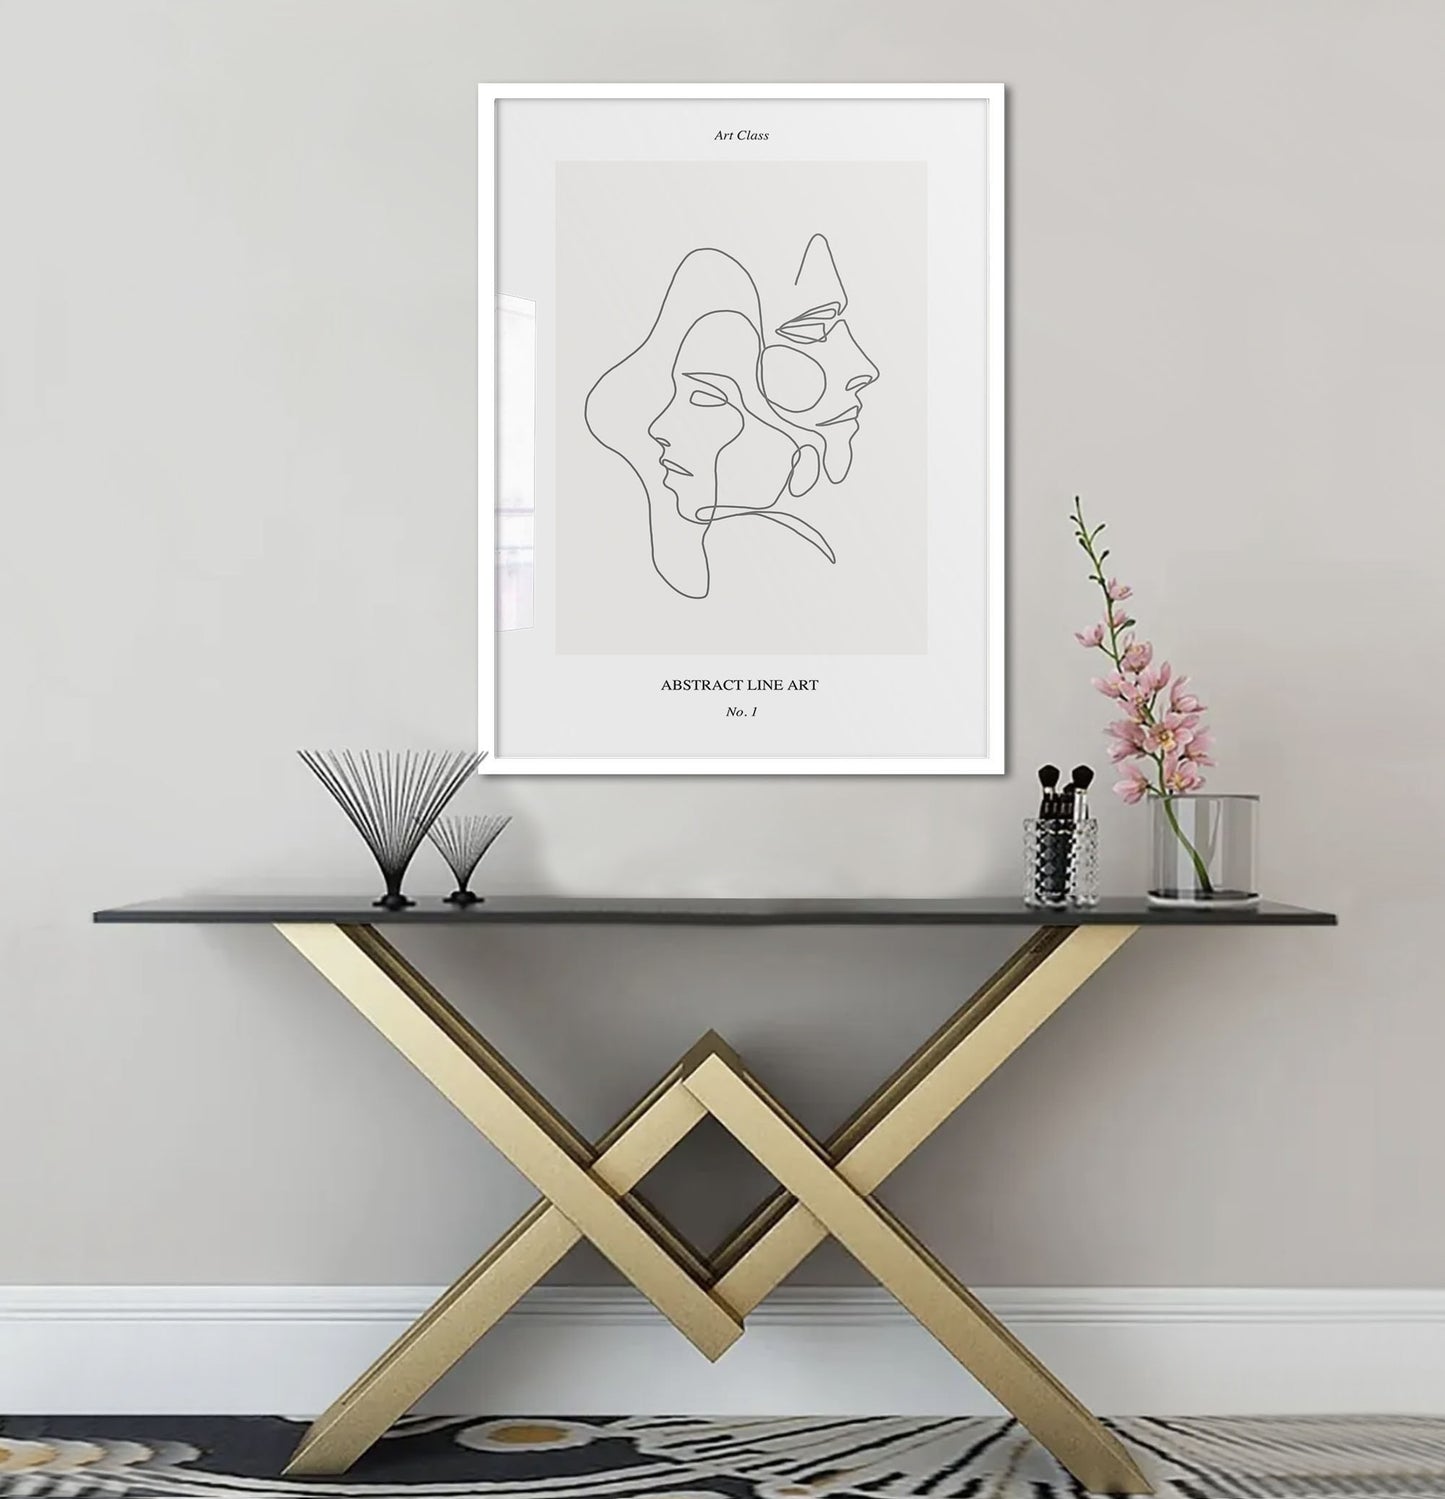 Entwined - Line Art Print No.1